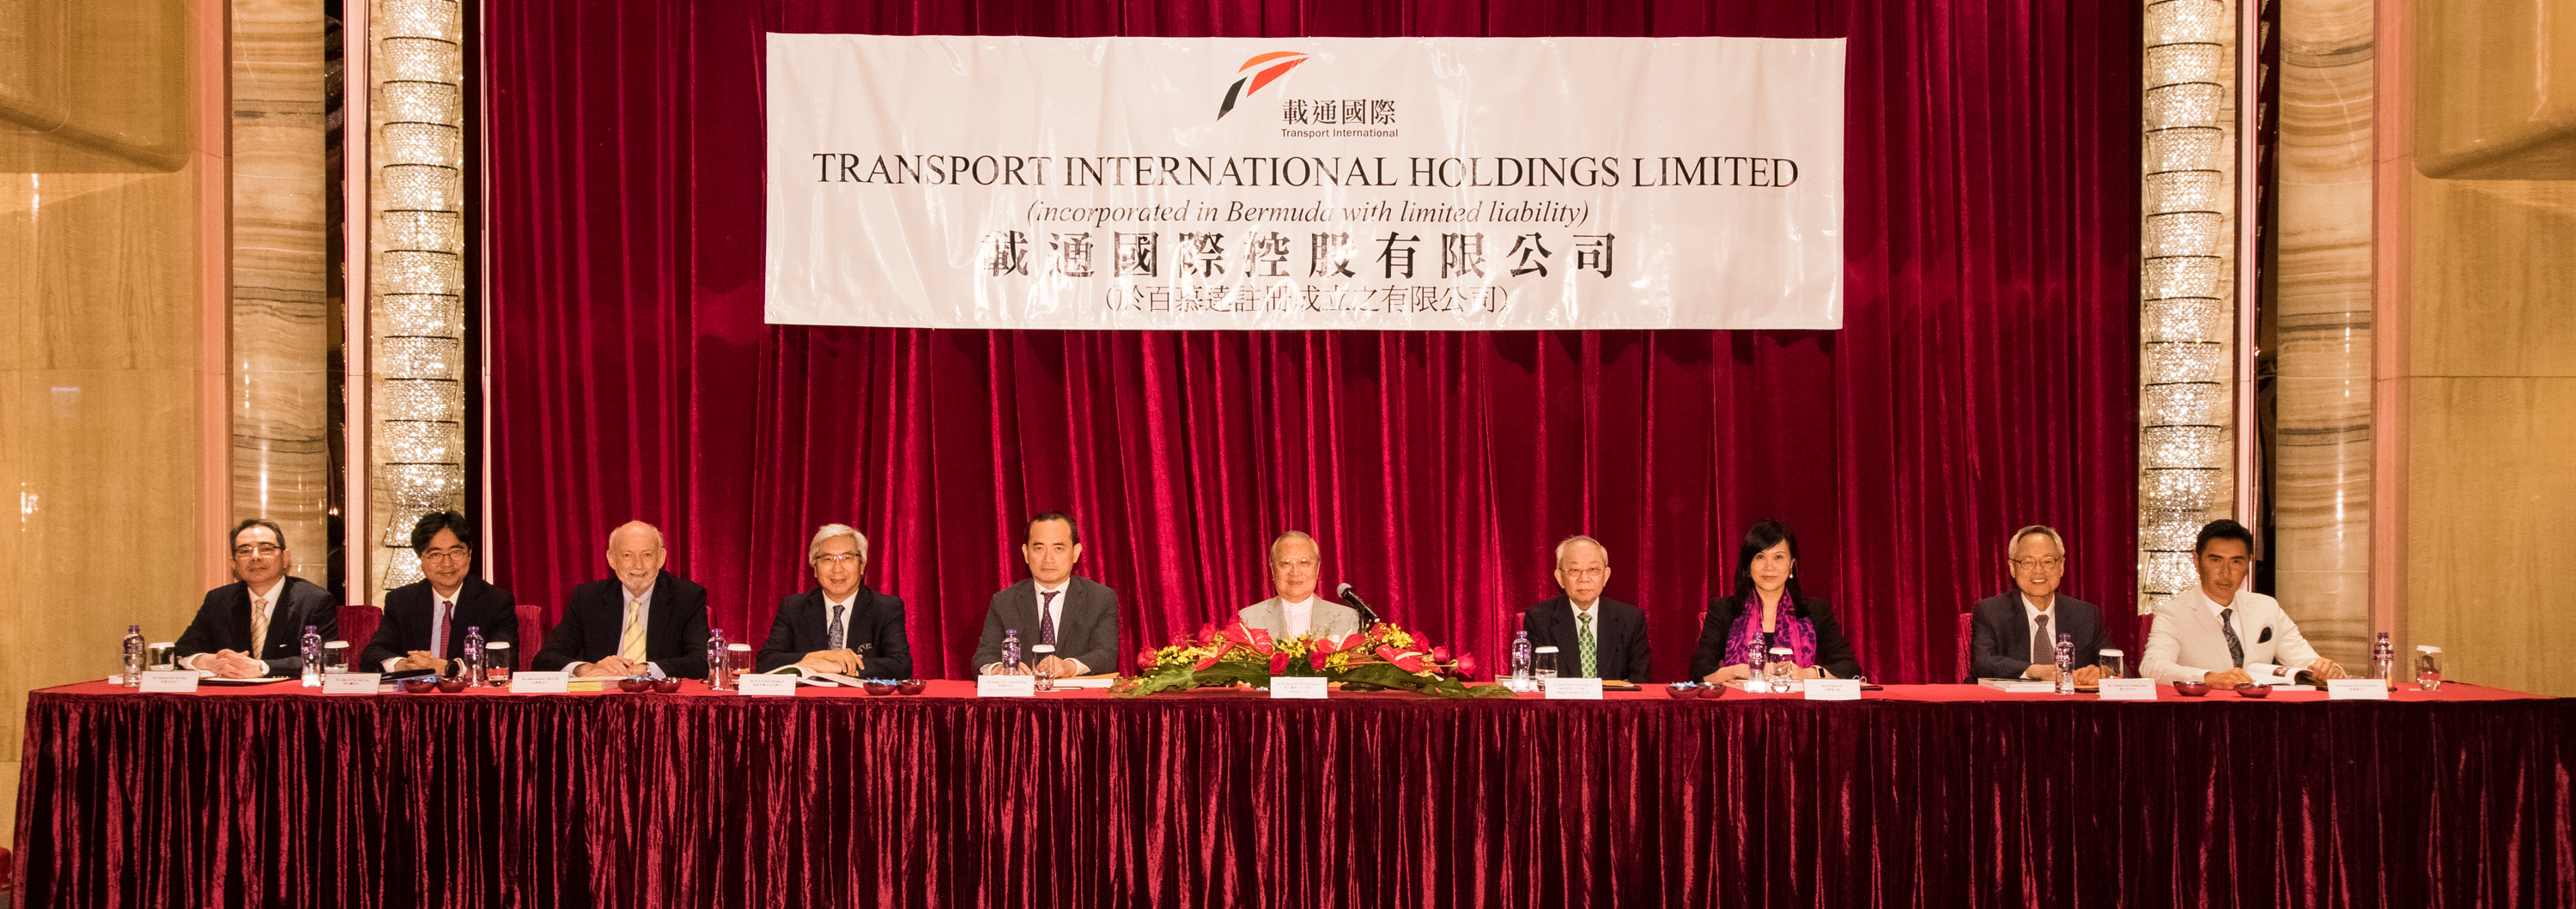 
Transport International Holdings Limited 2017 Annual General Meeting